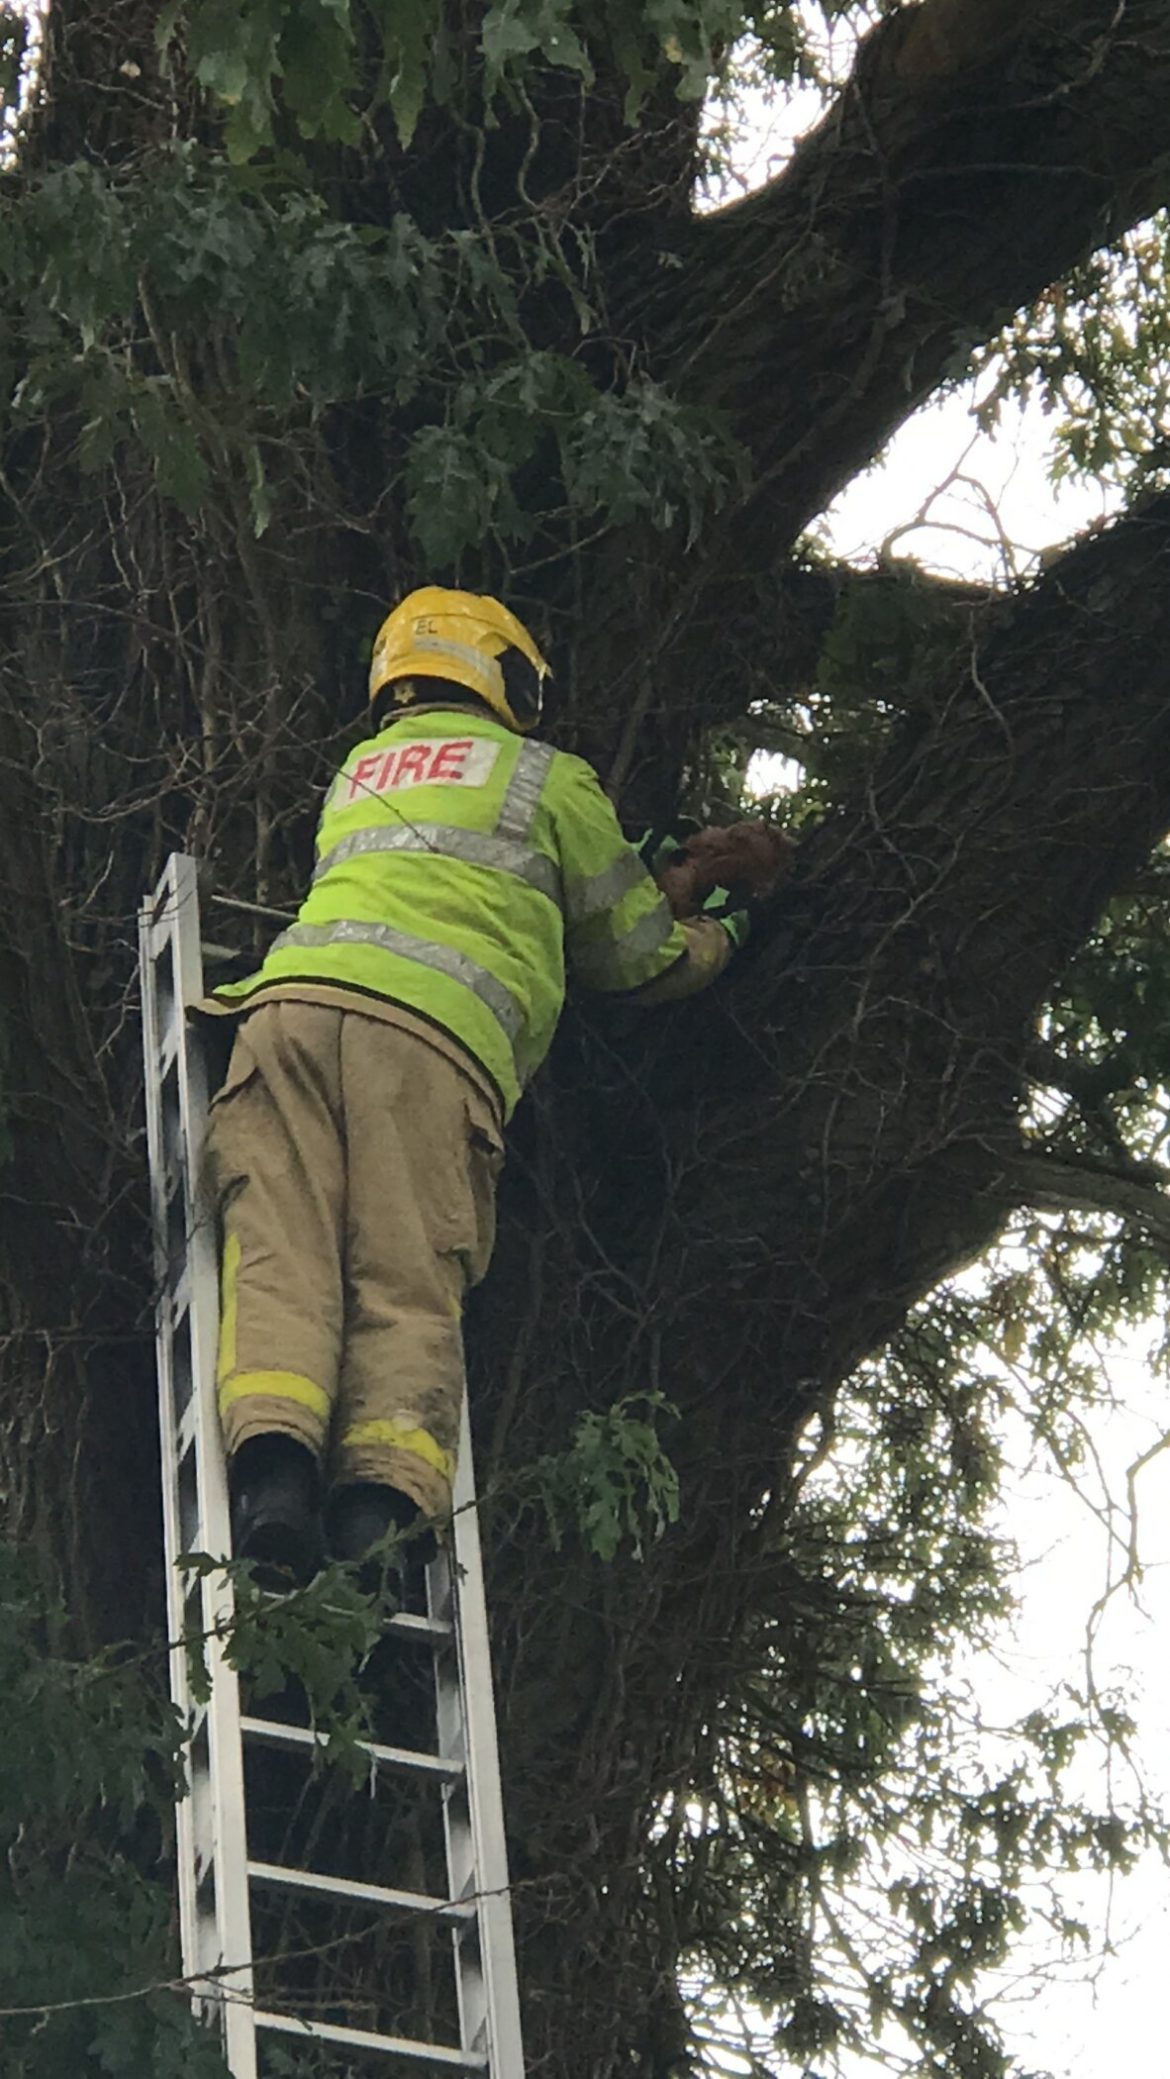 Squirrel Chasing Cat Spends Three Days Stranded in oak tree in Ellesmere